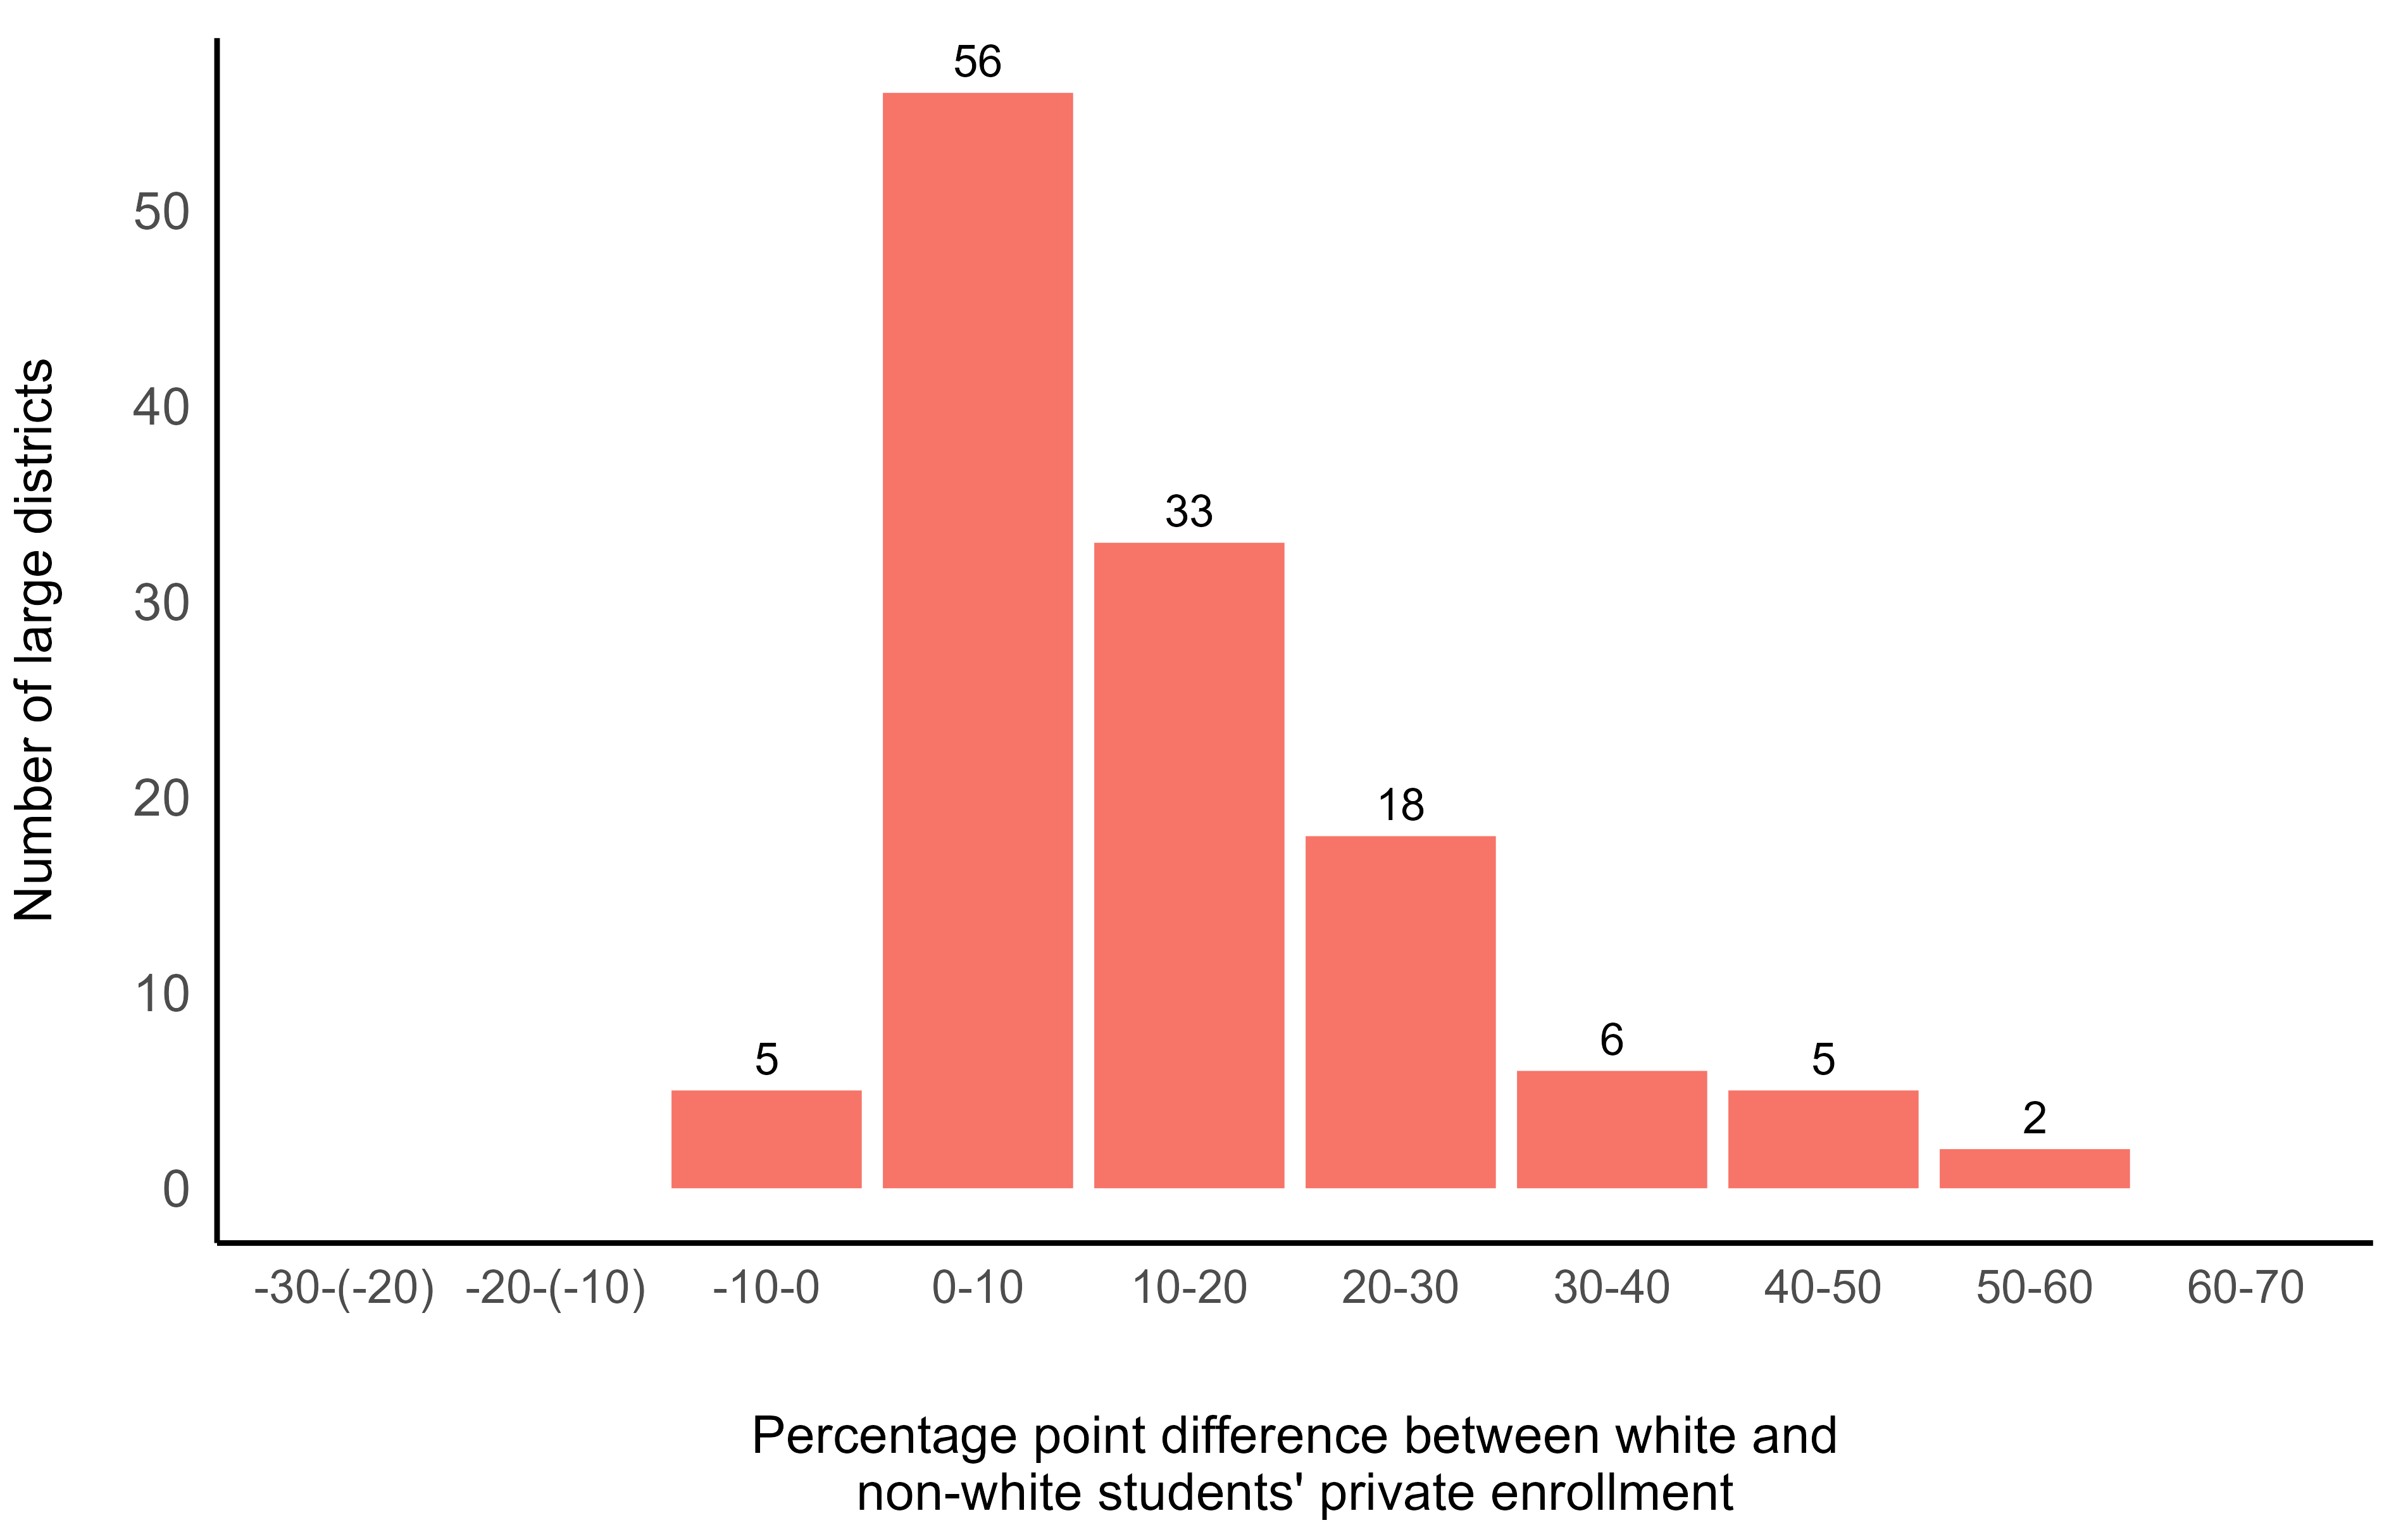 Figure 5: In most large school districts, White students have more access to private schools than non-White students.